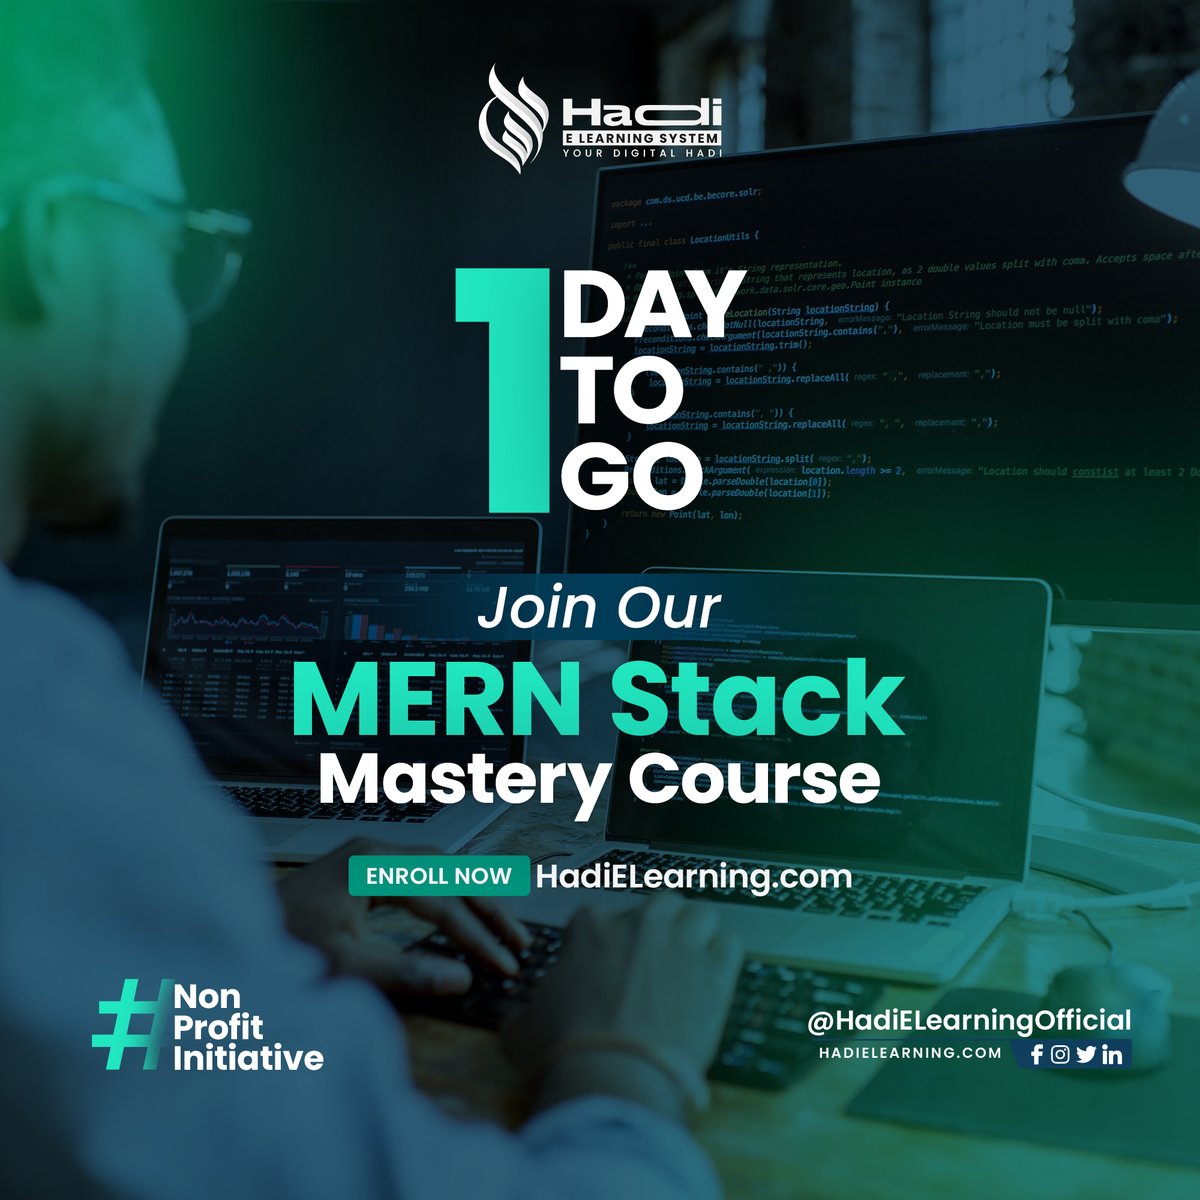 Reminder 📢

One Day Left to Master the MERN Stack!
Tomorrow at 6:00 PM- 23rd June 2023

What are you waiting for? Register Now
hadielearning.com/program/mern-s…

#mernstack #MongoDB #expressjs #ReactJS #nodejs #nodejsdeveloper #hadielearning #elearning #learnonline #mern #viral #skills